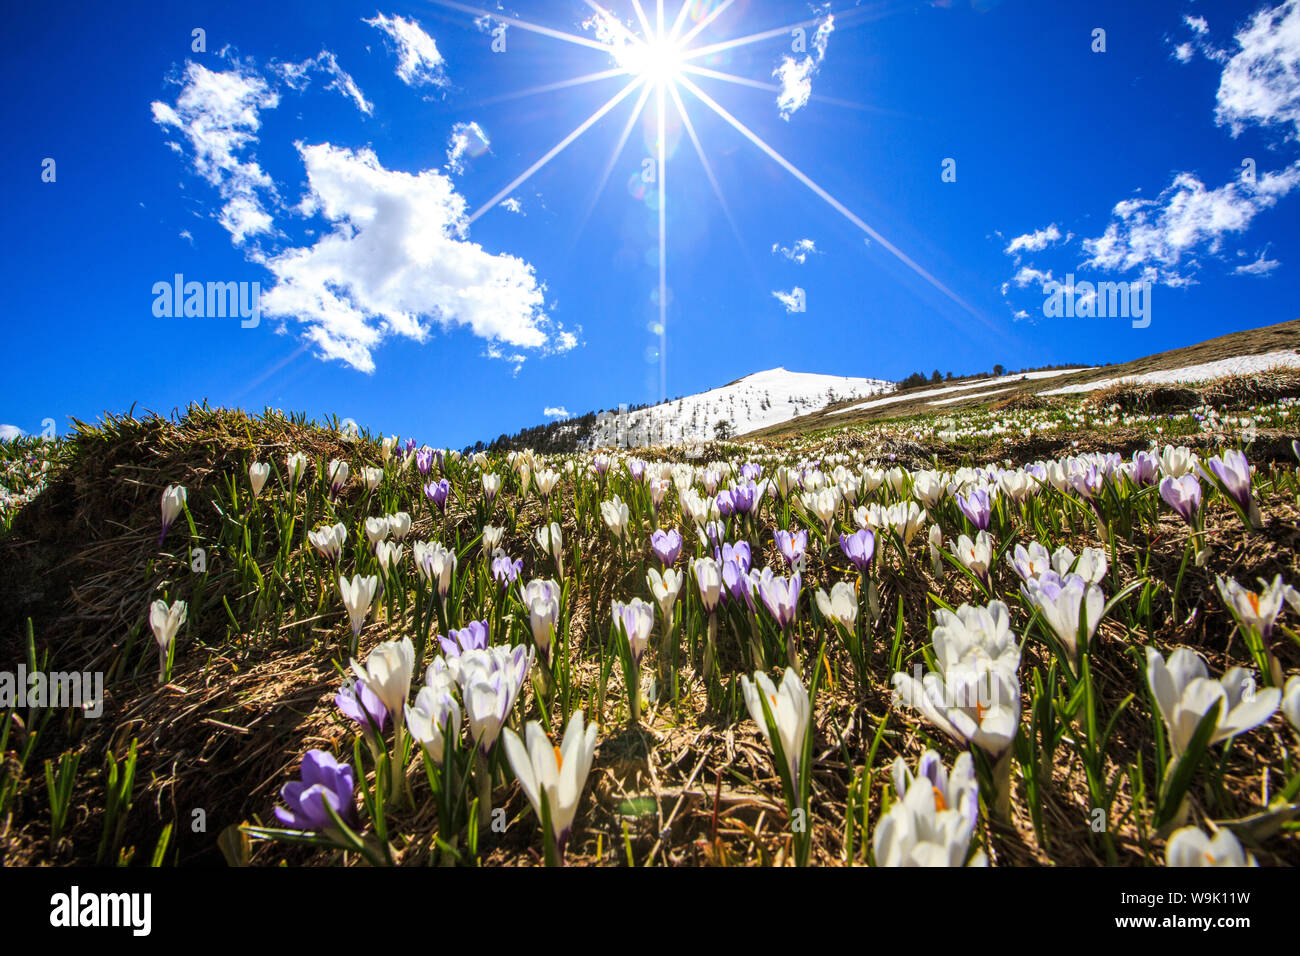 The sun illuminating the crocus blooming by the Cima della Rosetta with its peak still covered in snow, Lombardy, Italy, Europe Stock Photo